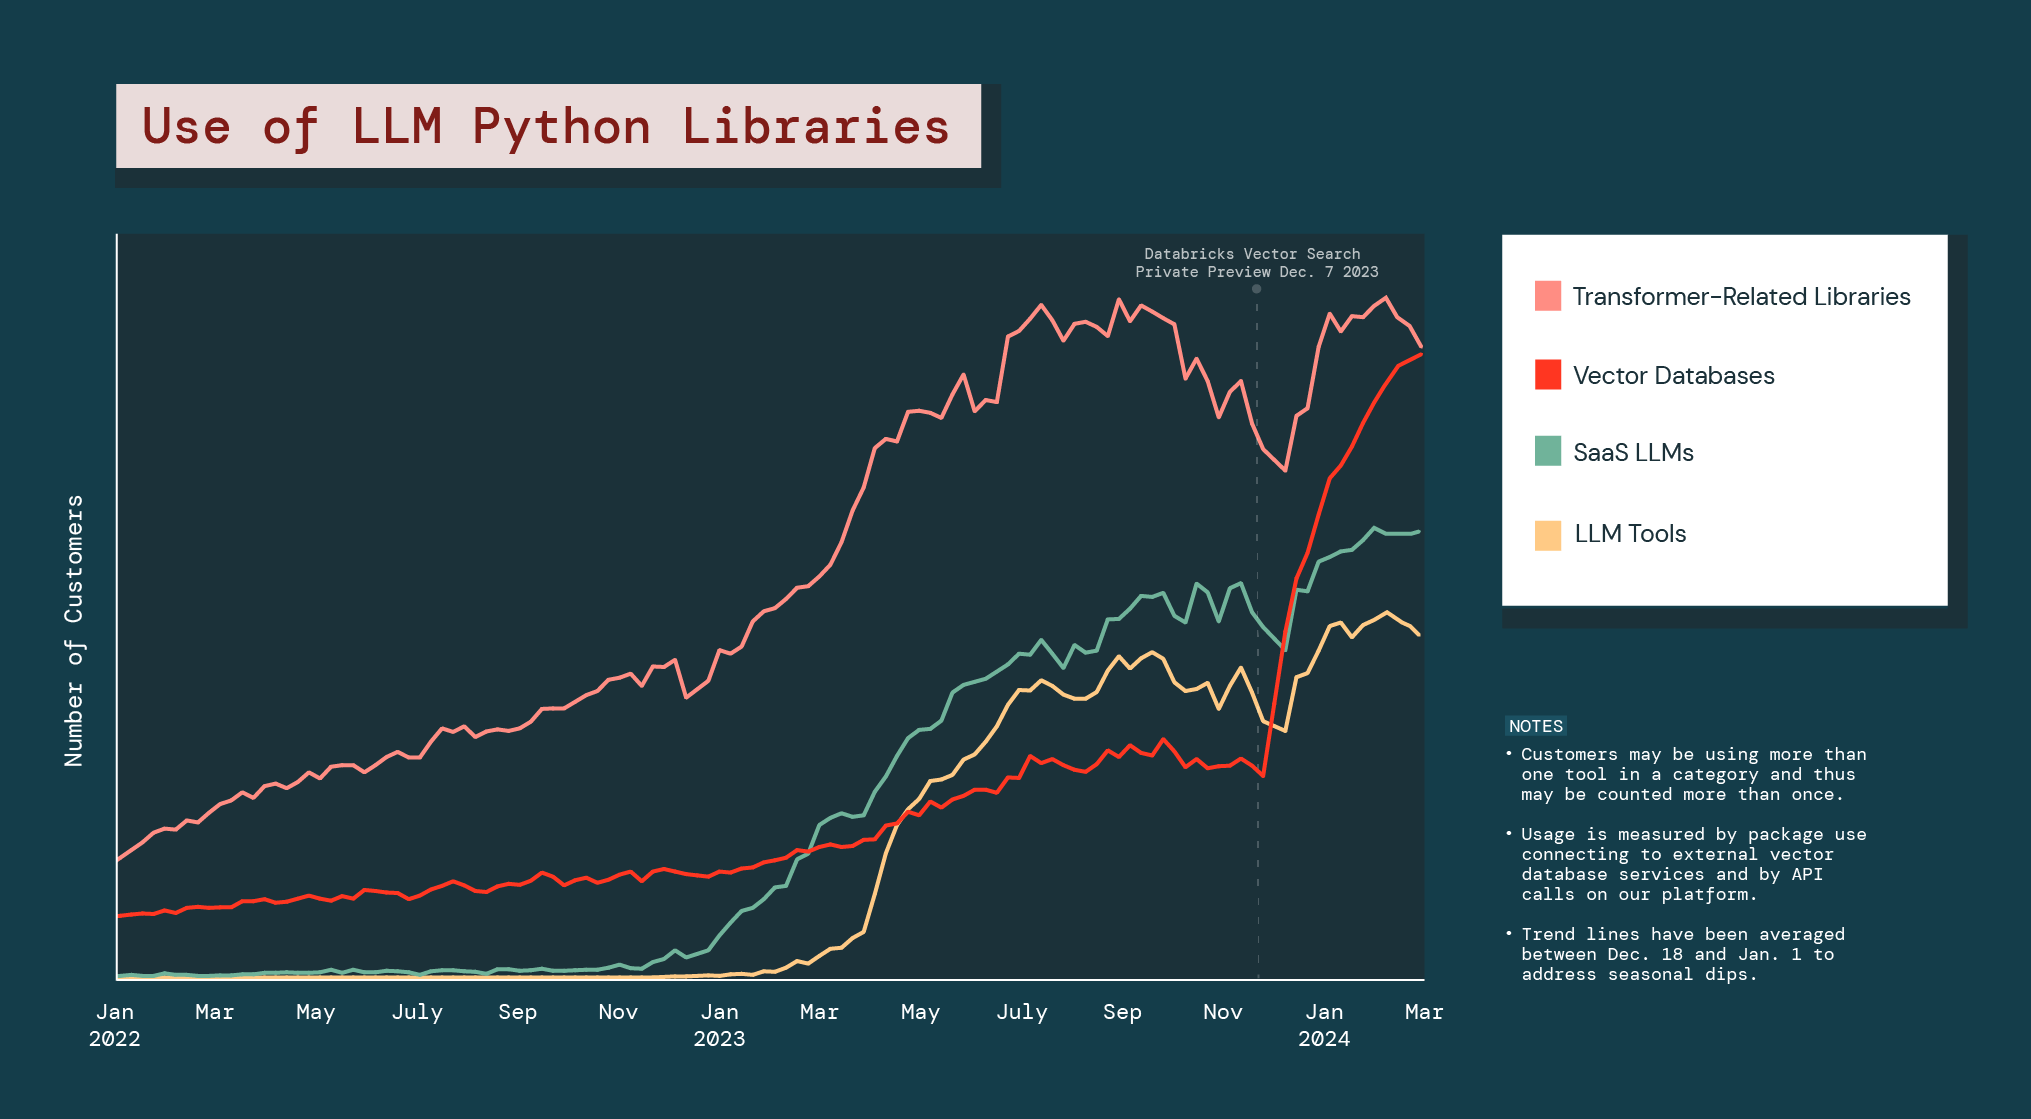 Chart - Use of LLM Python Libraries